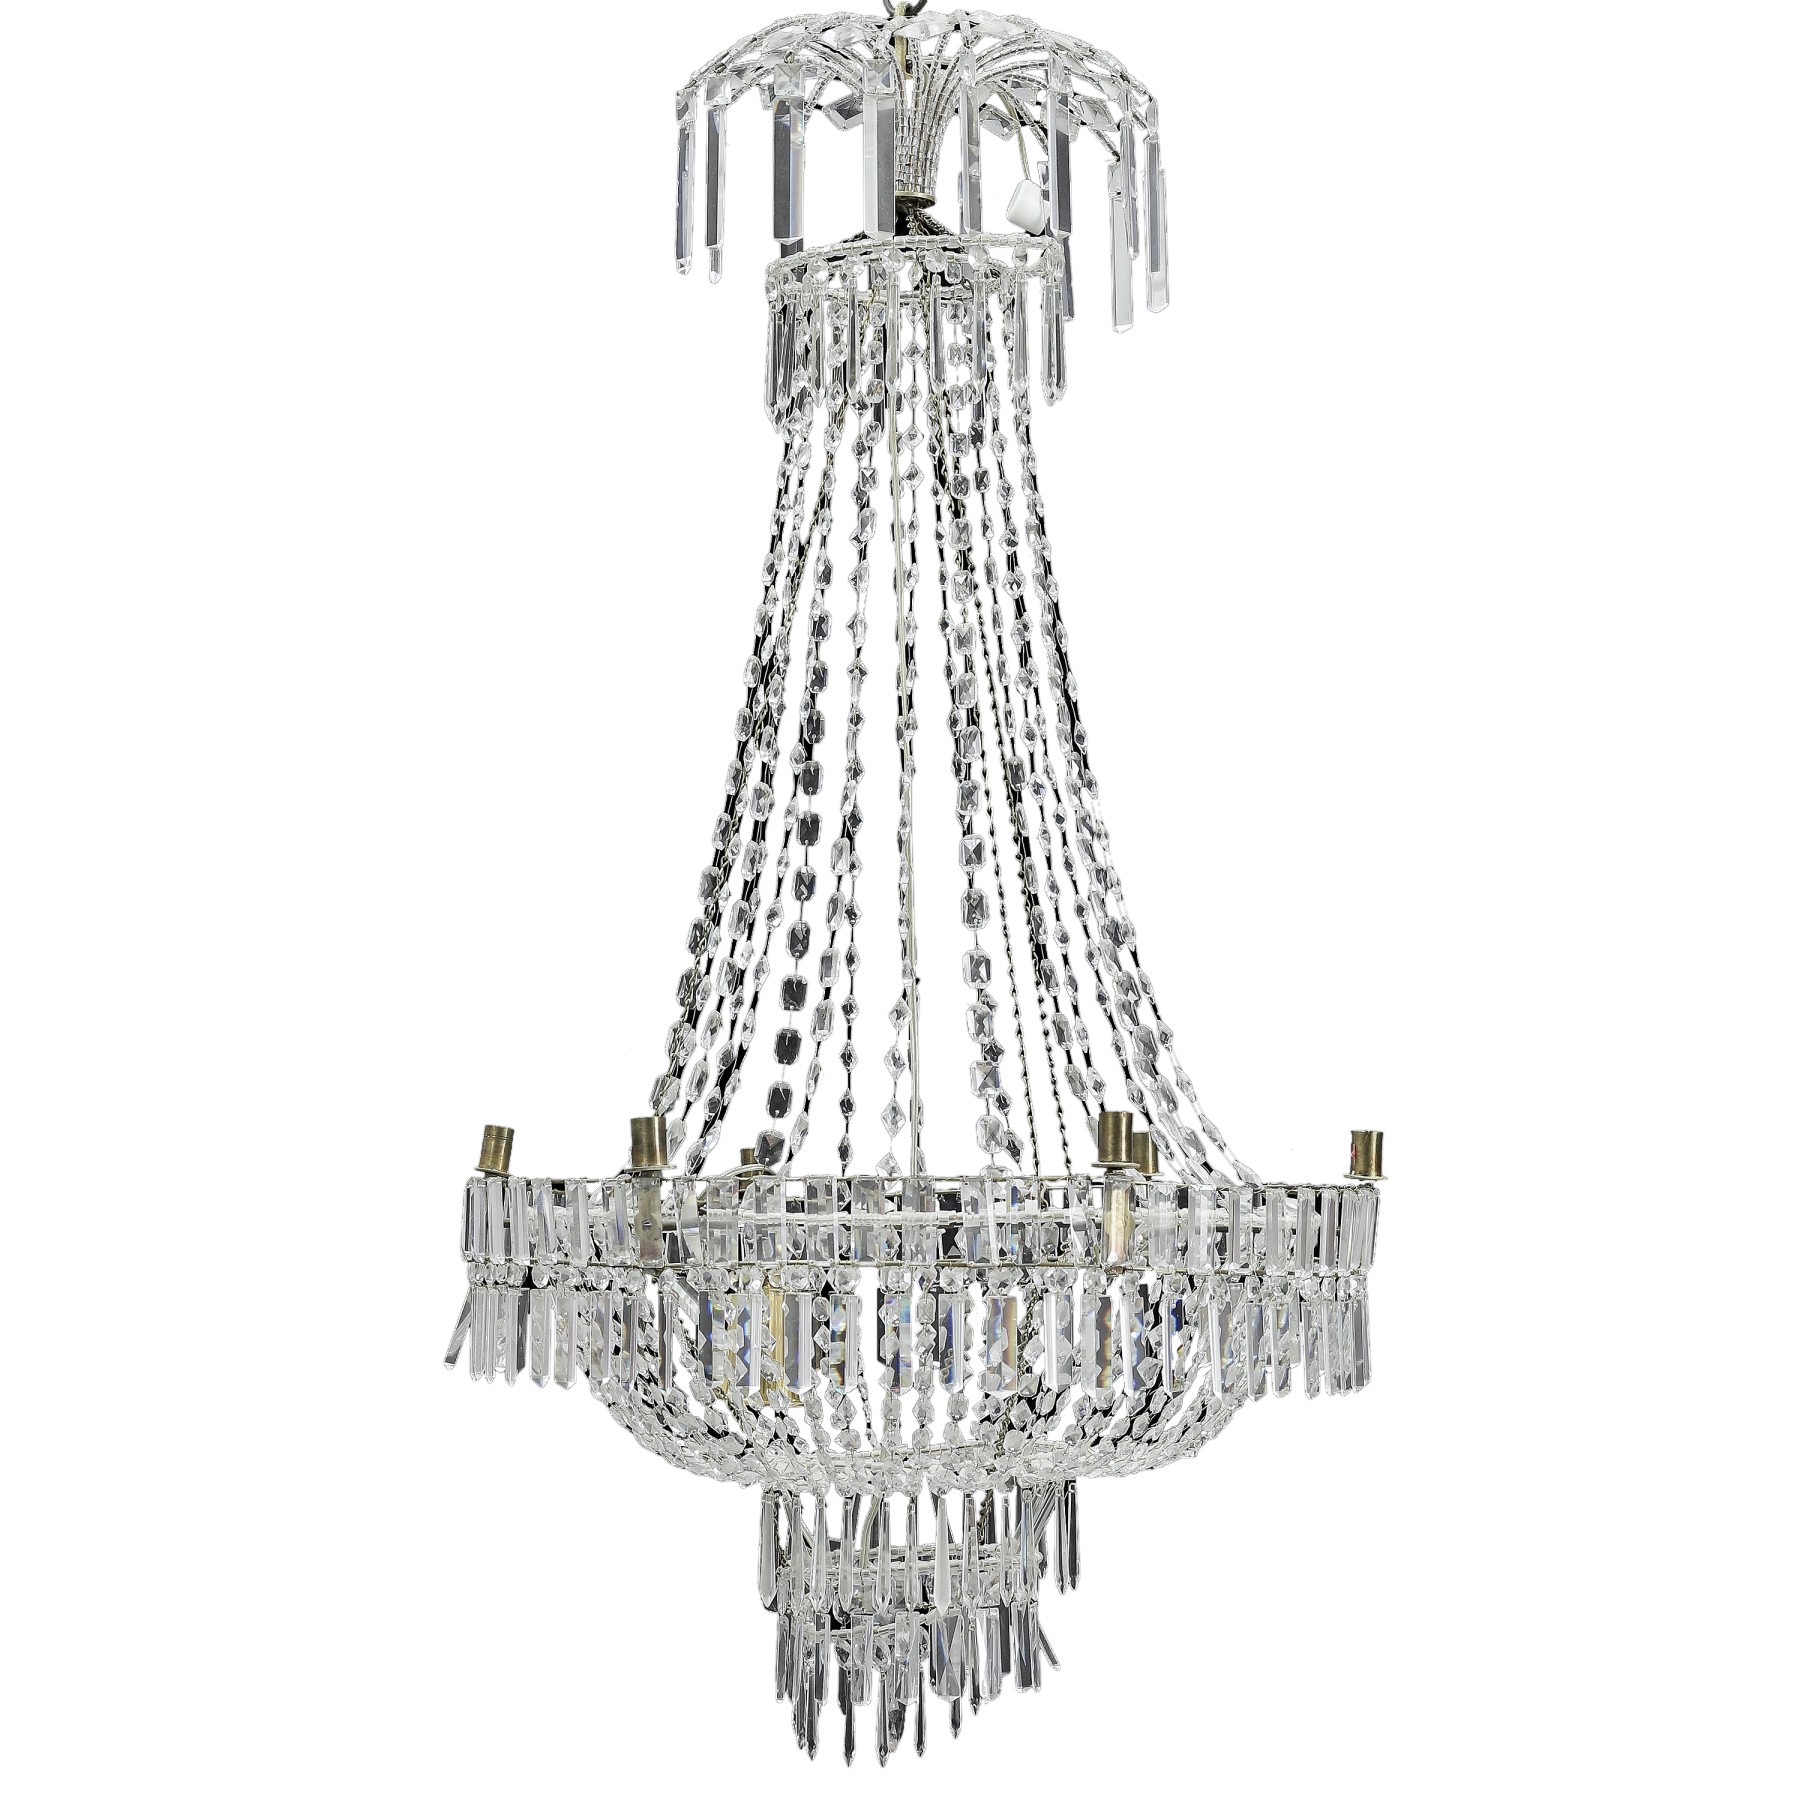 Large Swedish Classical Art Deco Chandelier In White Crystal Ref 82516